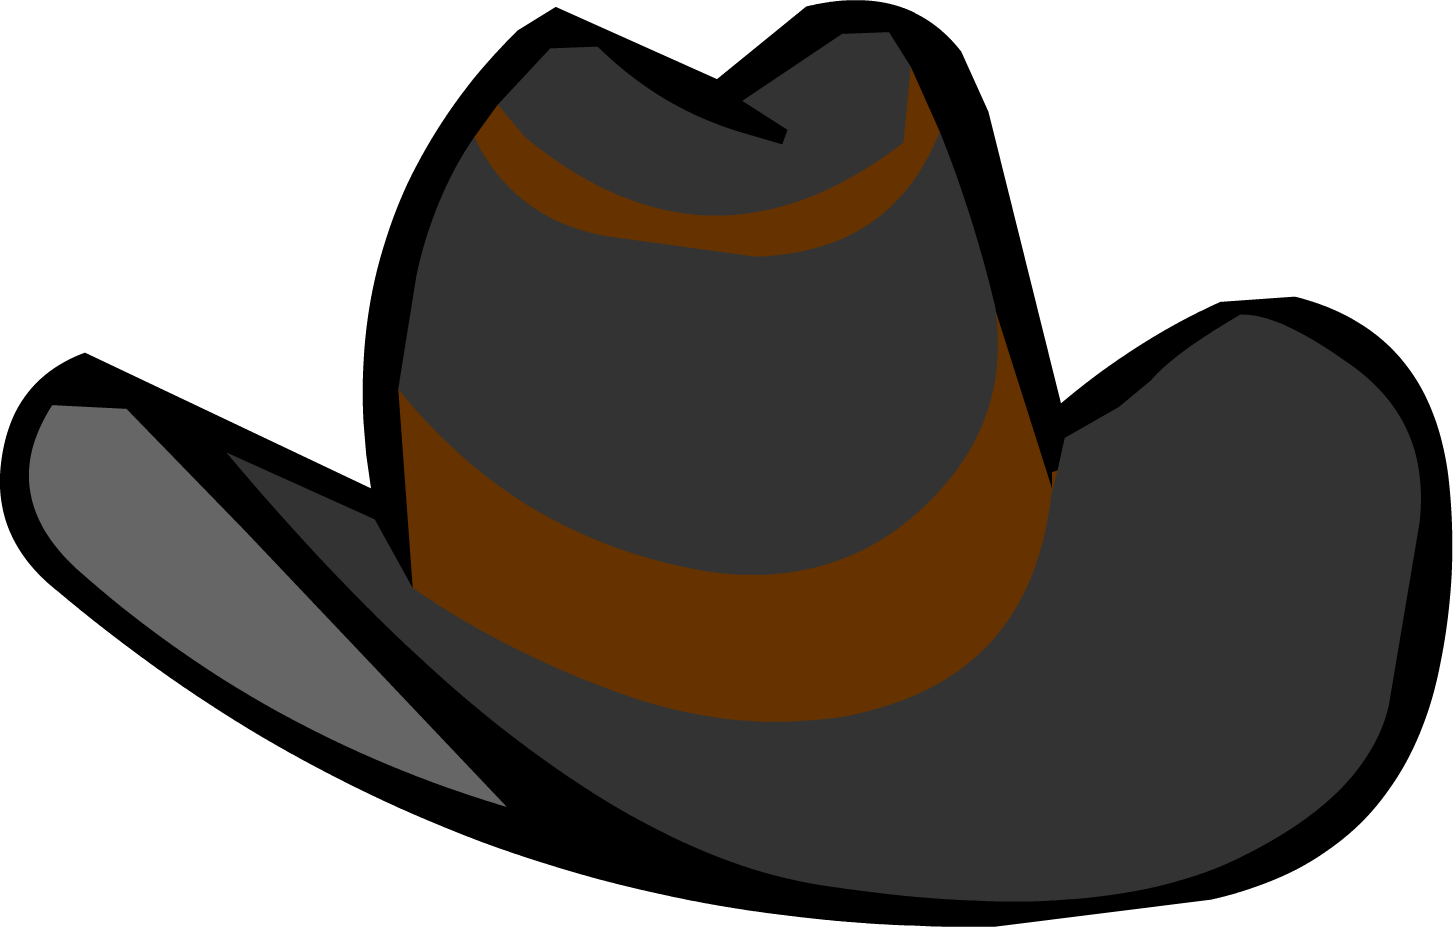 western hat clipart - photo #22